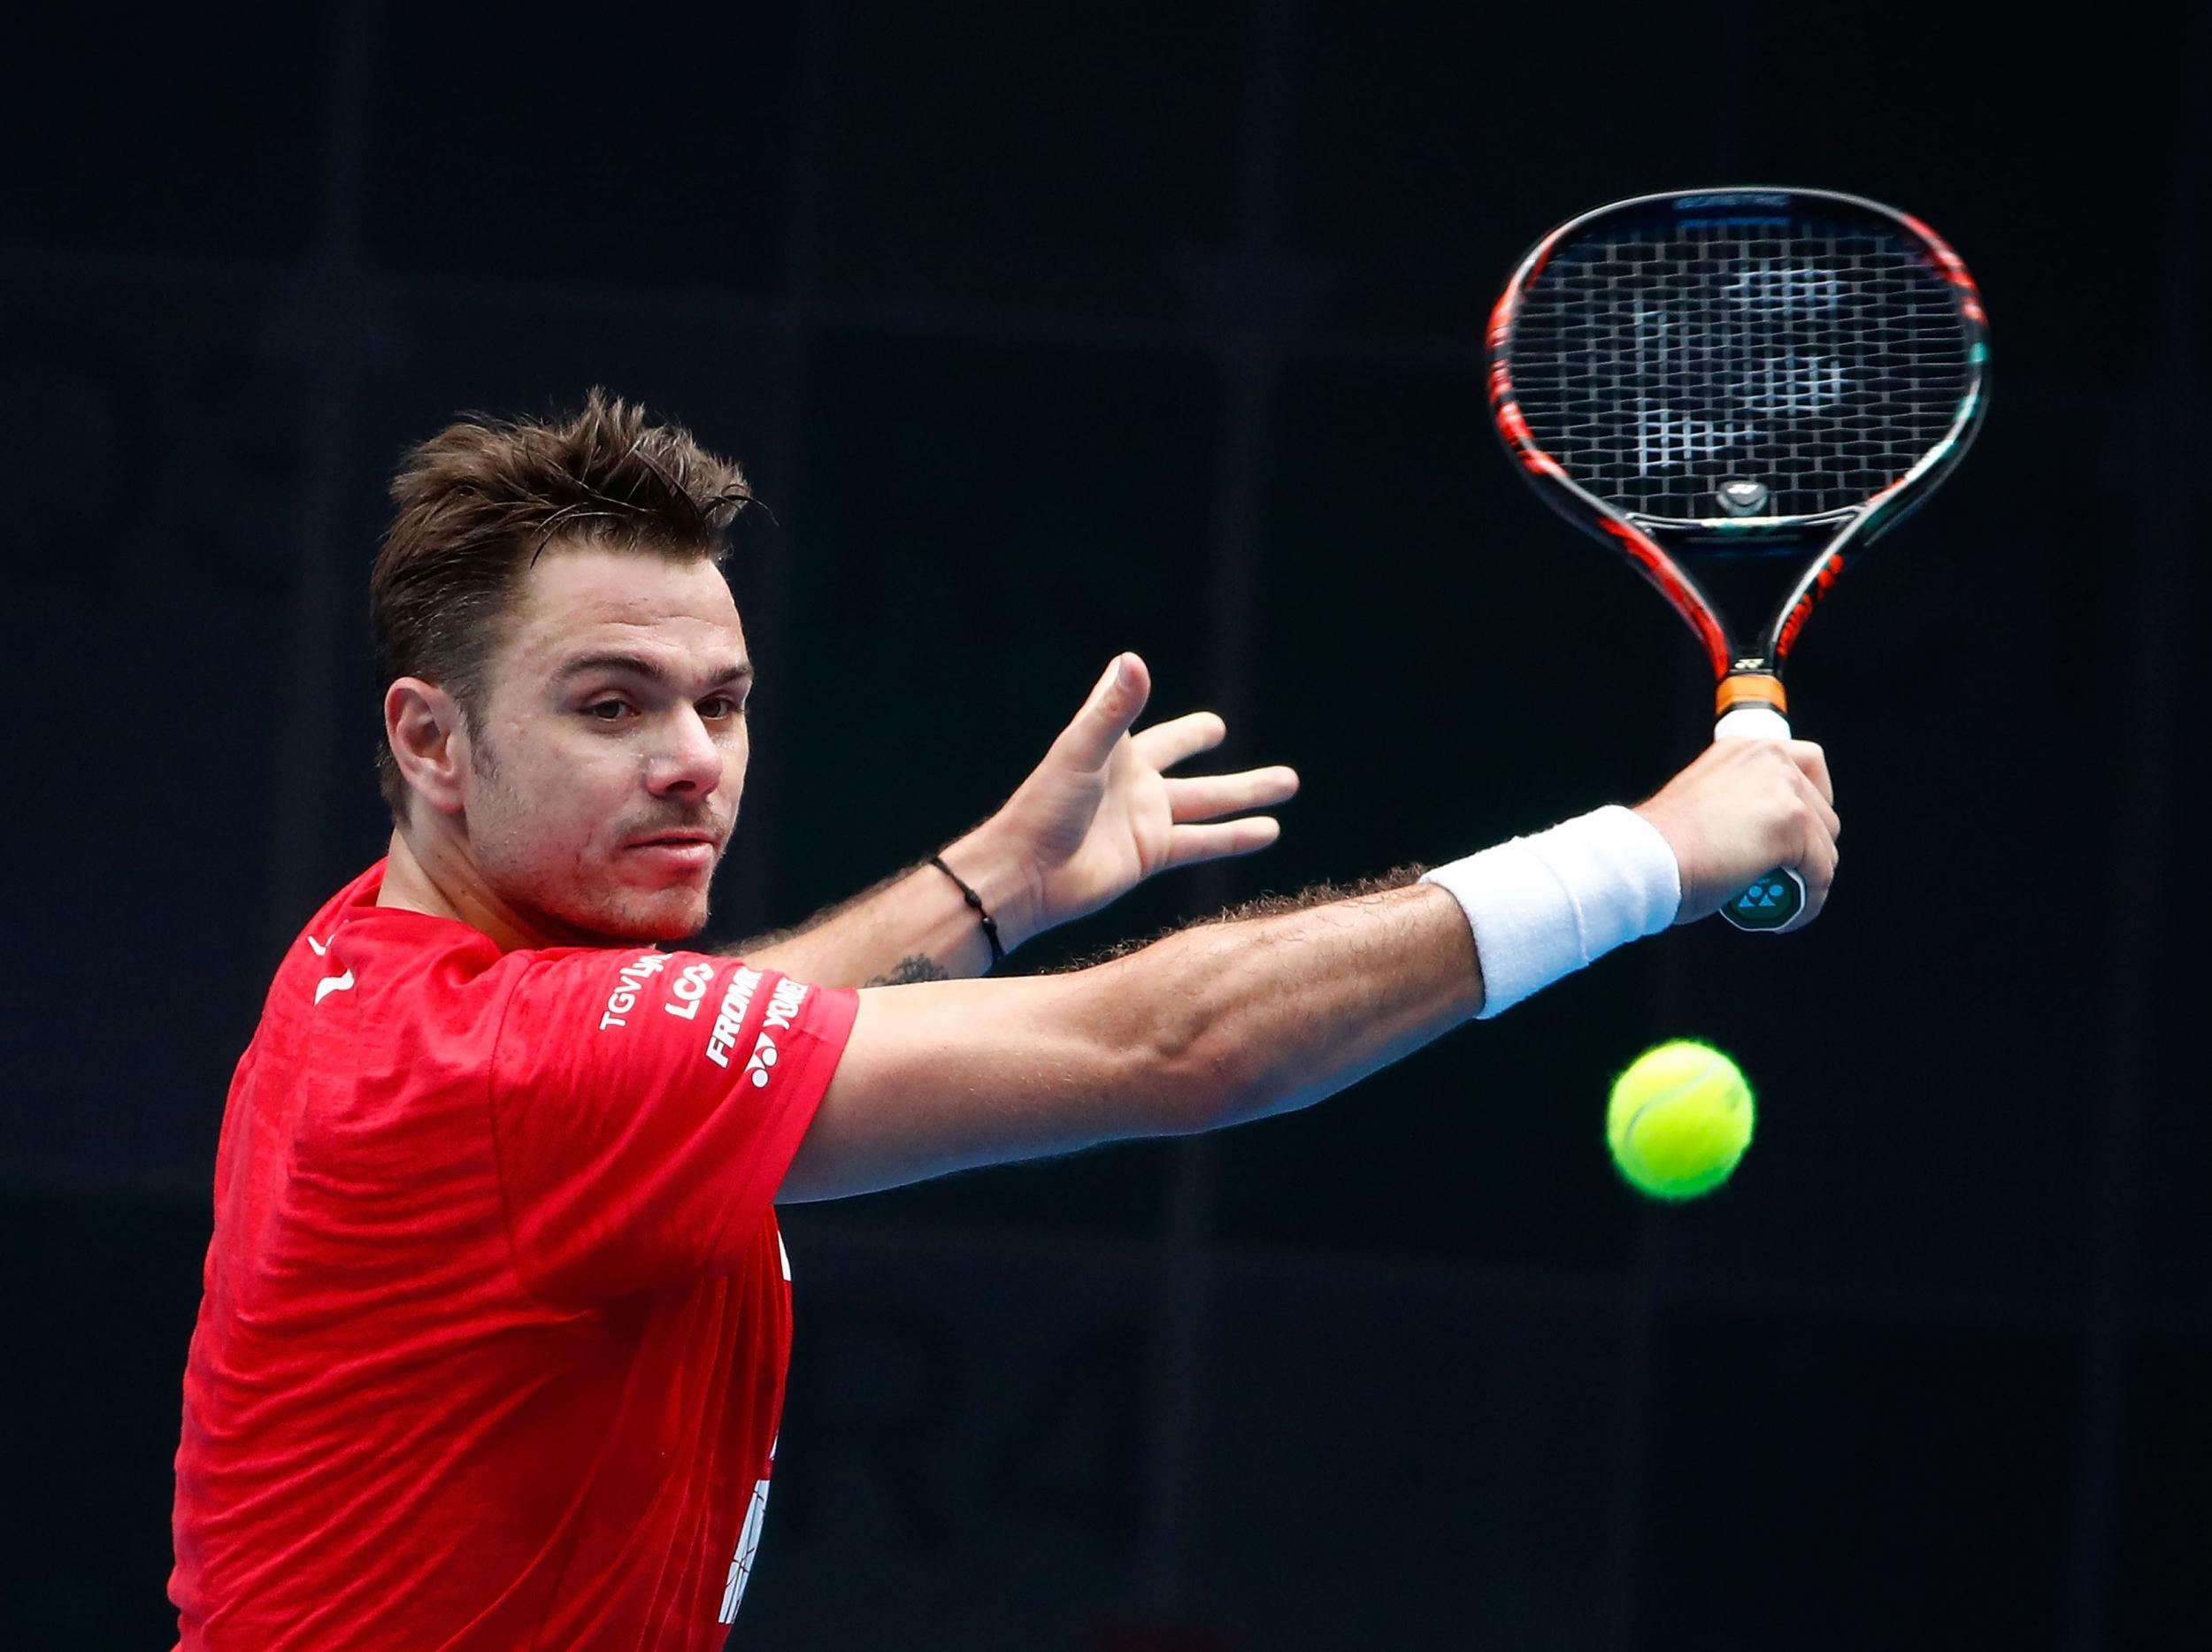 &#13;
Wawrinka is back fit after six months out &#13;